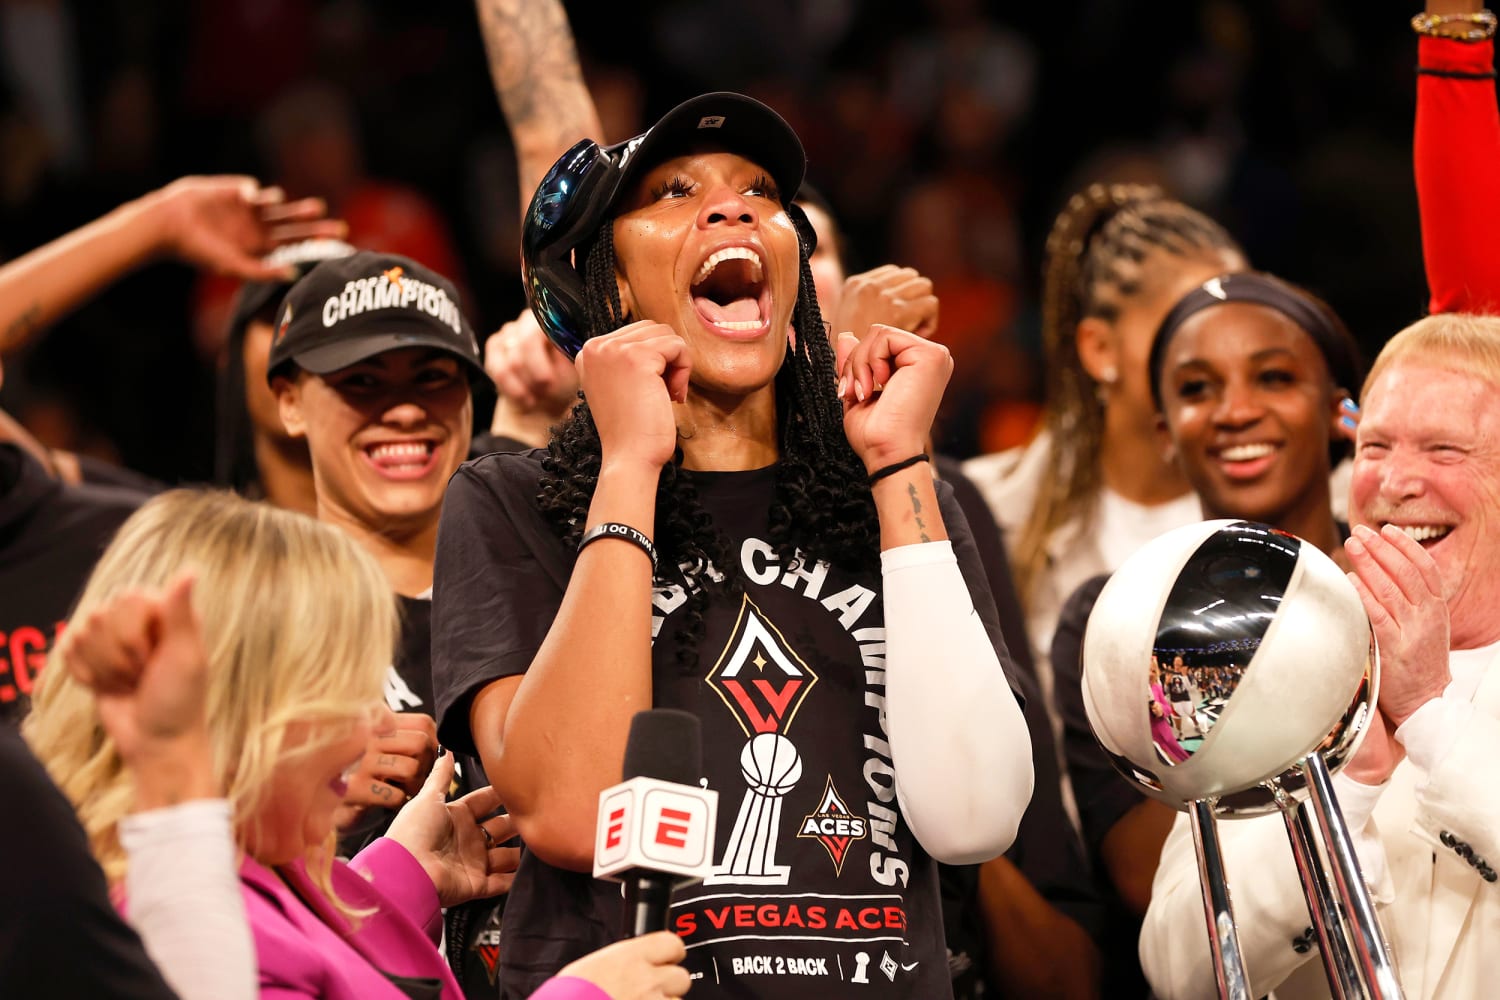 History Made Las Vegas Aces Are Your 2023 WNBA Champions Back To